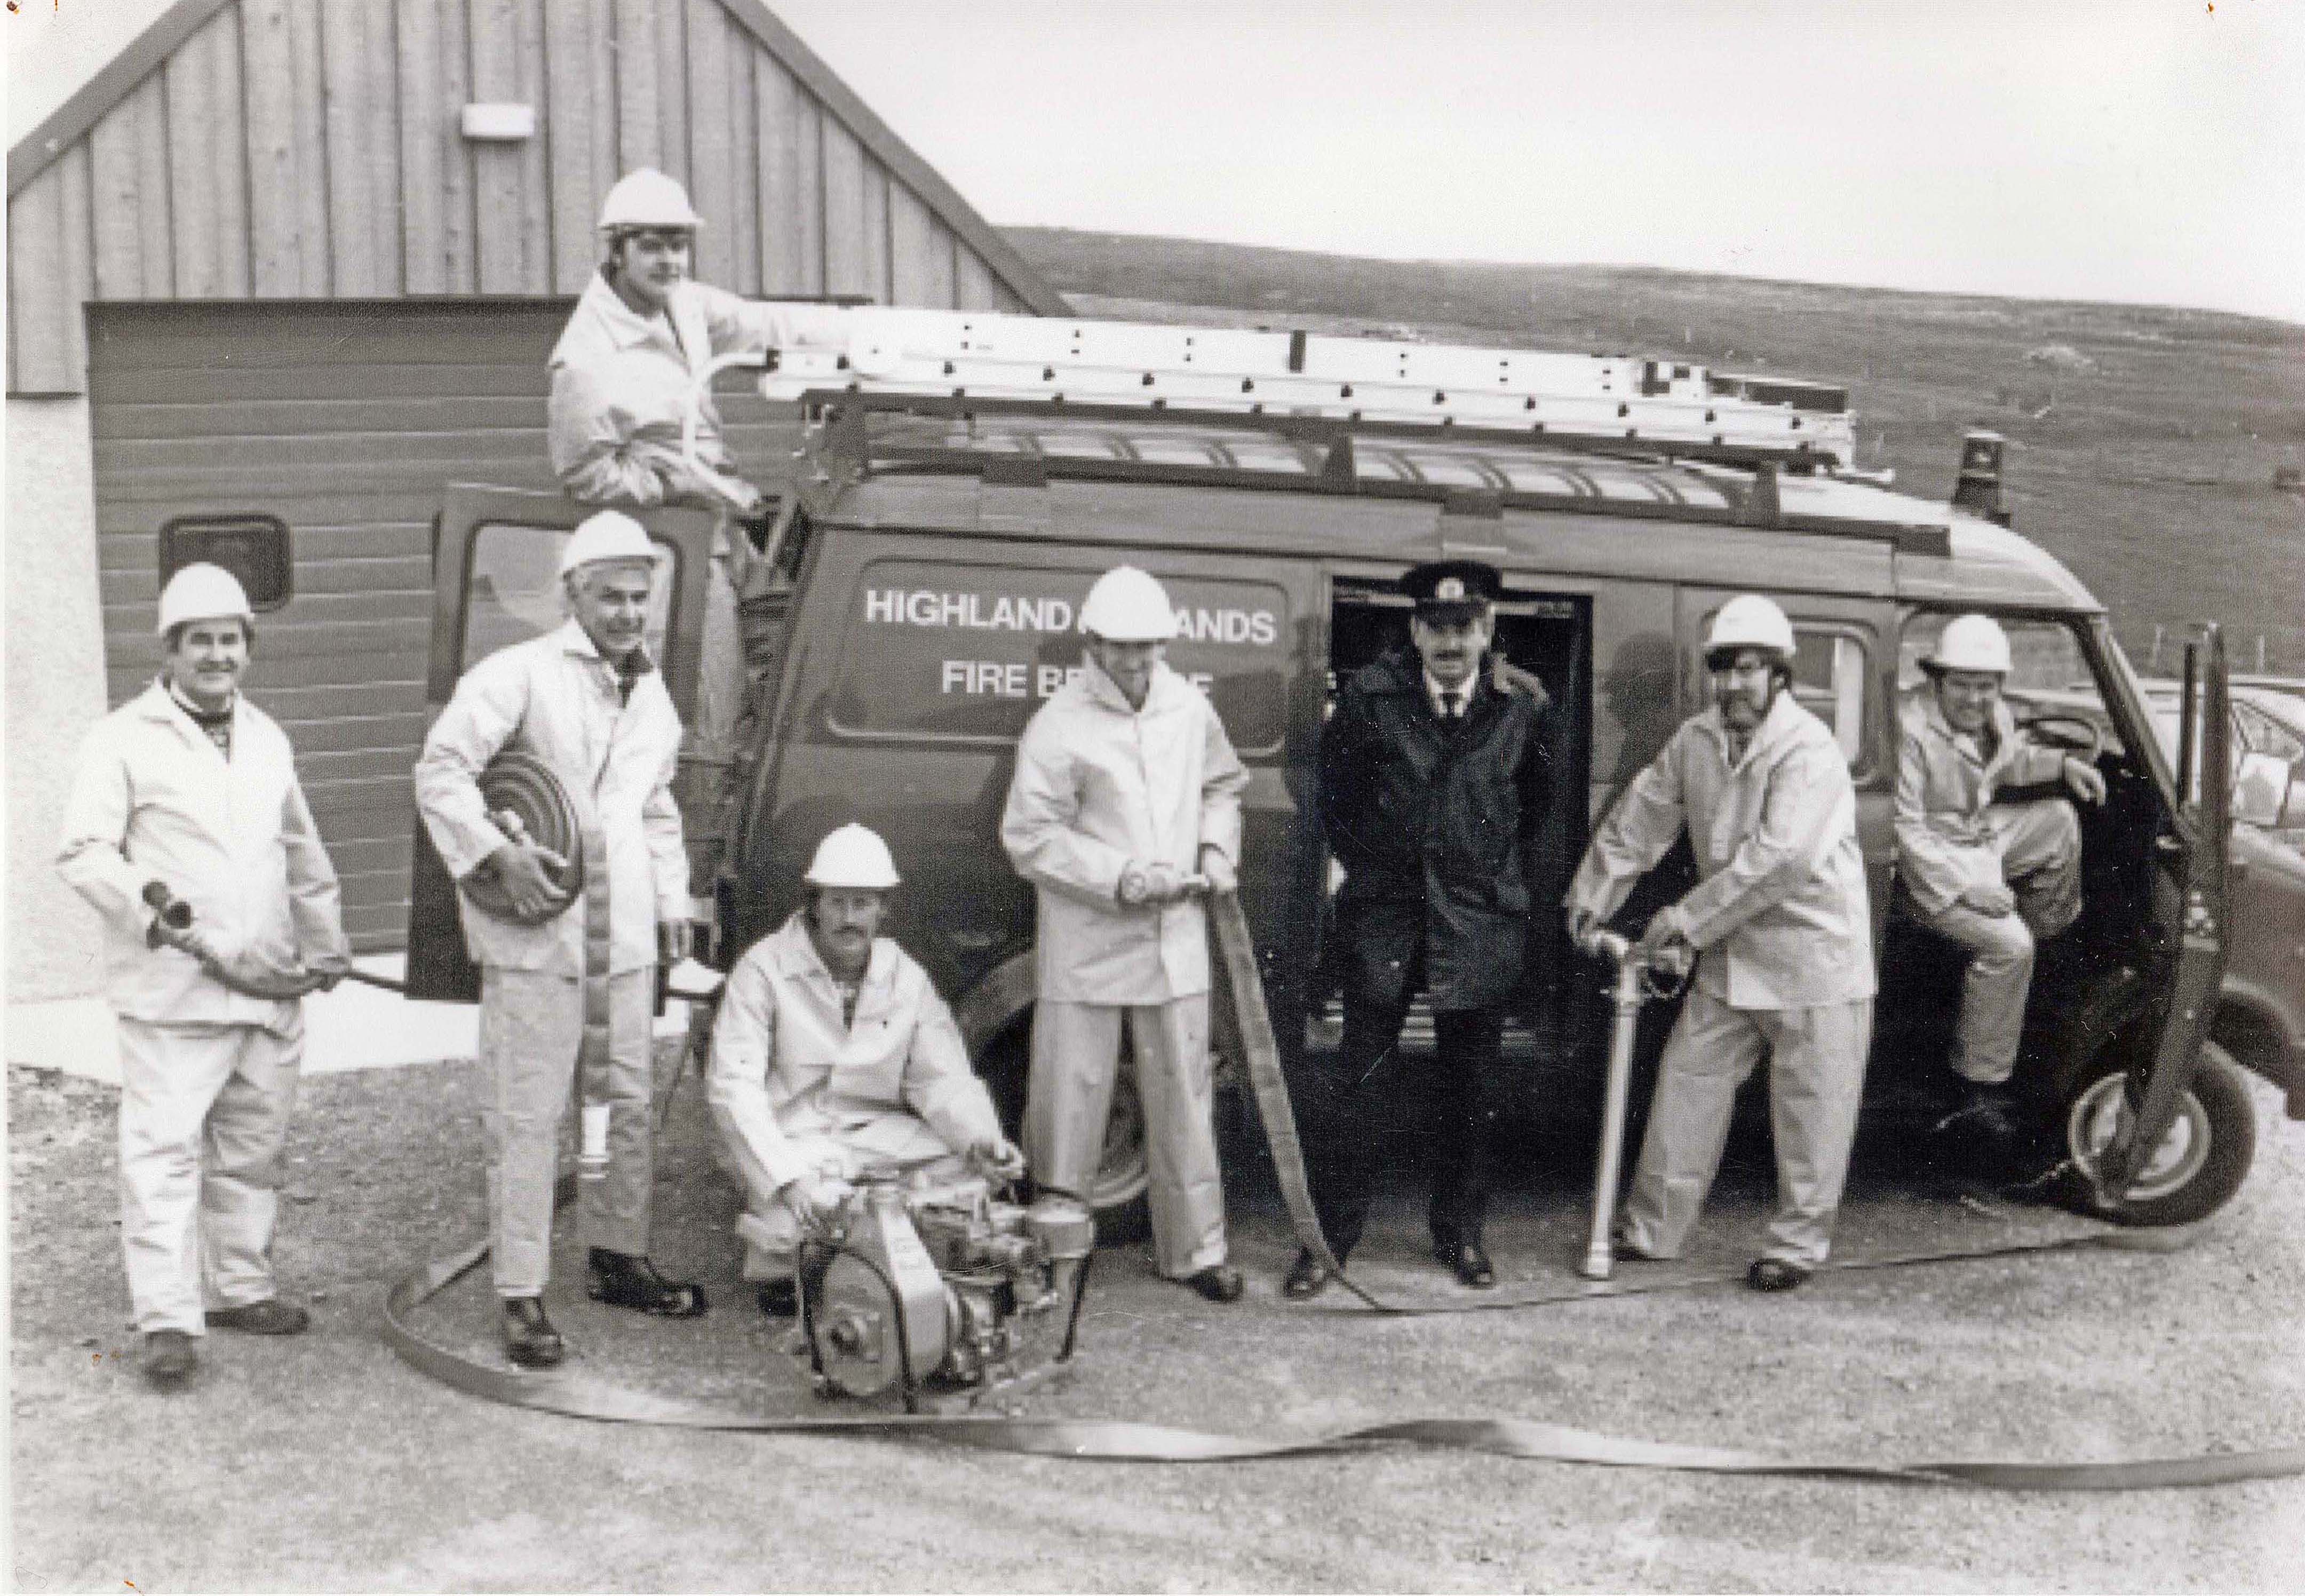 Highlands and Island Fire brigade reunion. the original picture taken i  1986. l-r David Arthur,Andrew Williamson ( with hose), James Anderson, Tom Shearer, John Simpson, the divisional fire commander (name unknown), Charlie Hutchison and George Leask. This picture was taken in 1986, and has been reproduced in  an almost ideintical picture taken in 2019.